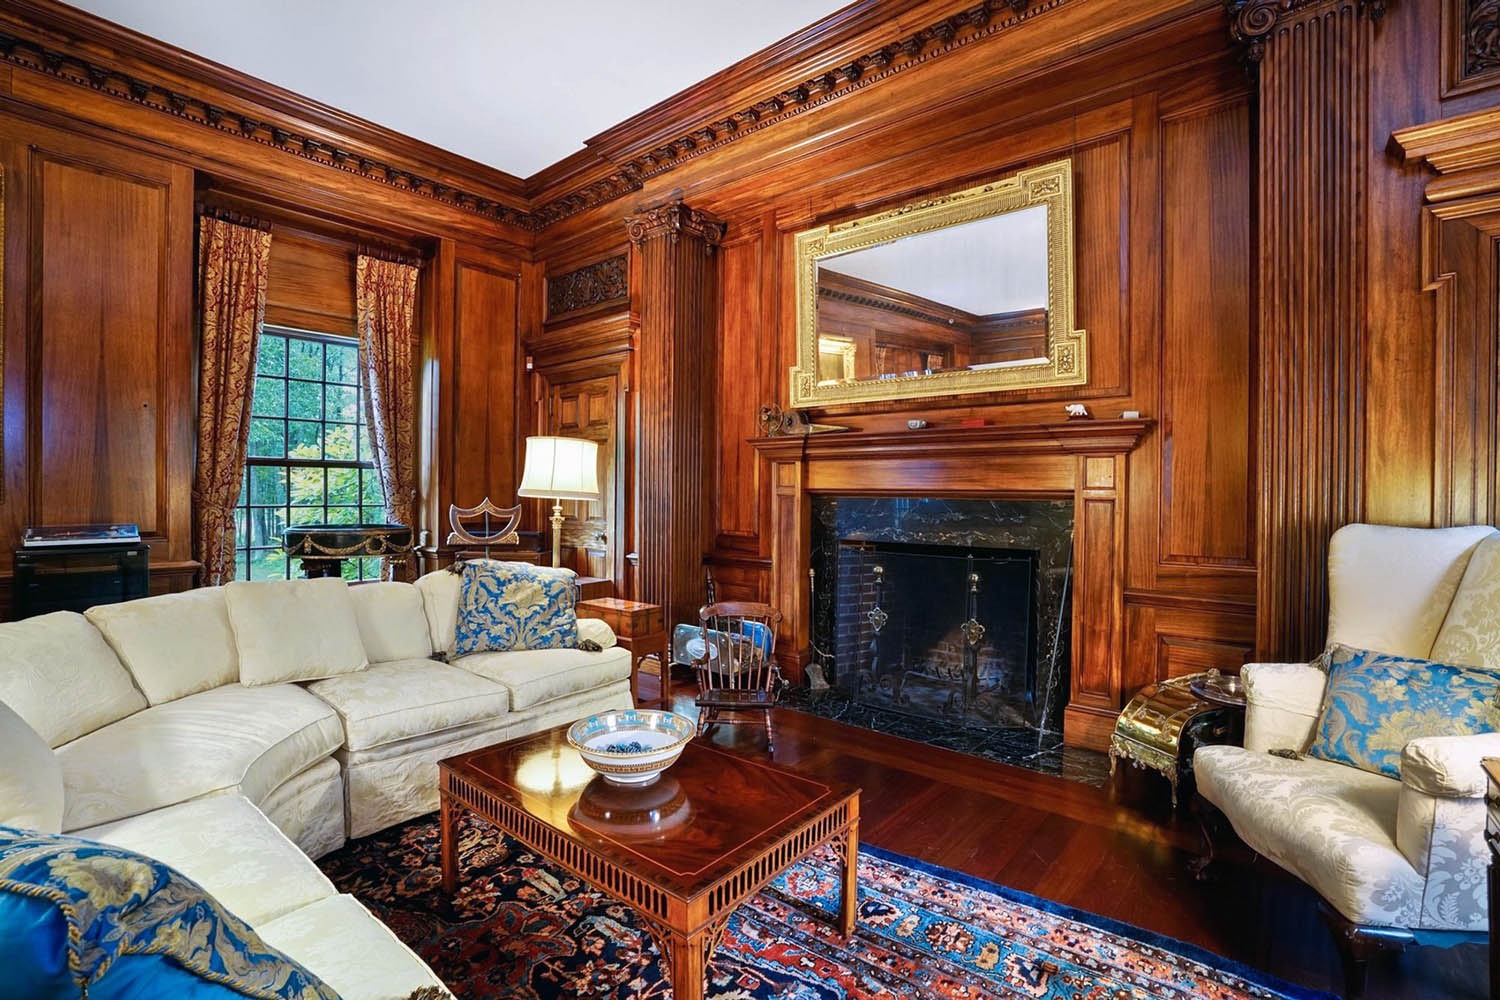 Wooden wall paneling with fireplace. Wood surround. Wood floors. Thick crown molding and custom trim. Plush white sofas.